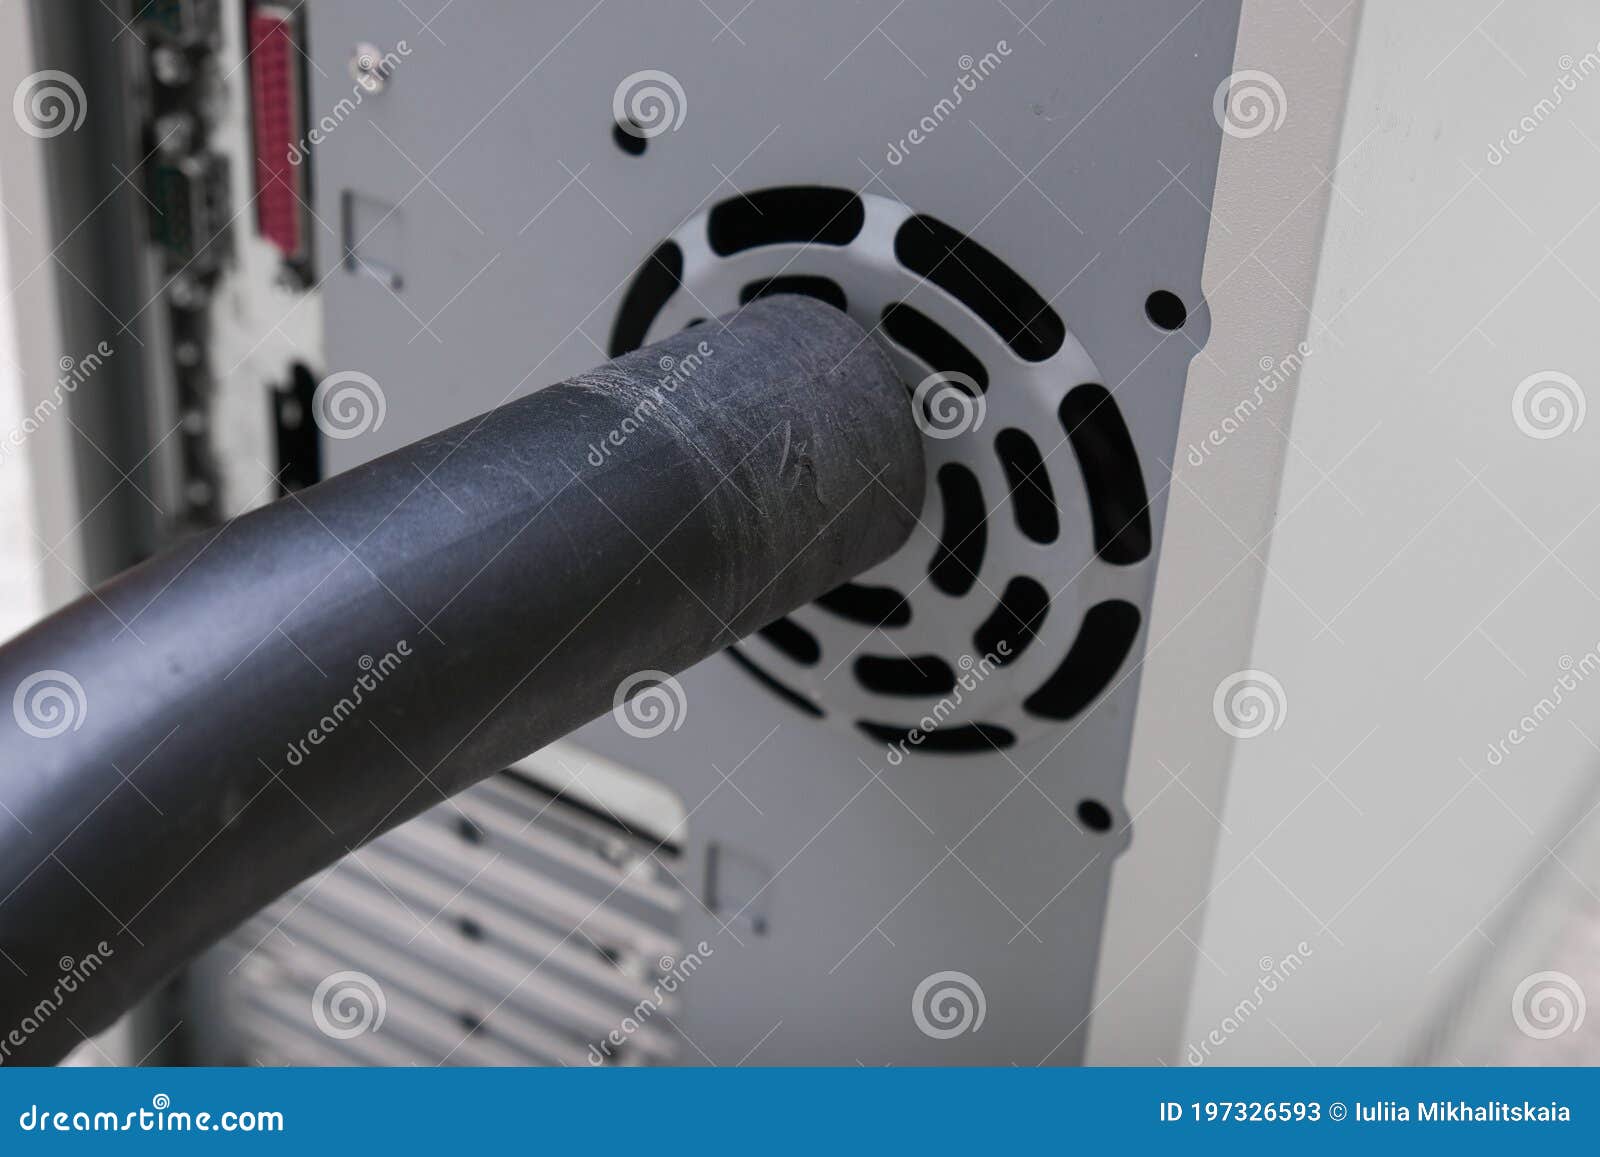 A Technician Cleaning Fan Of A Computer System Box With Vacuum Cleaner From Dust And Dirt Diy And Computer Maintenance Concept Stock Image Image Of Motherboard Airflow 197326593